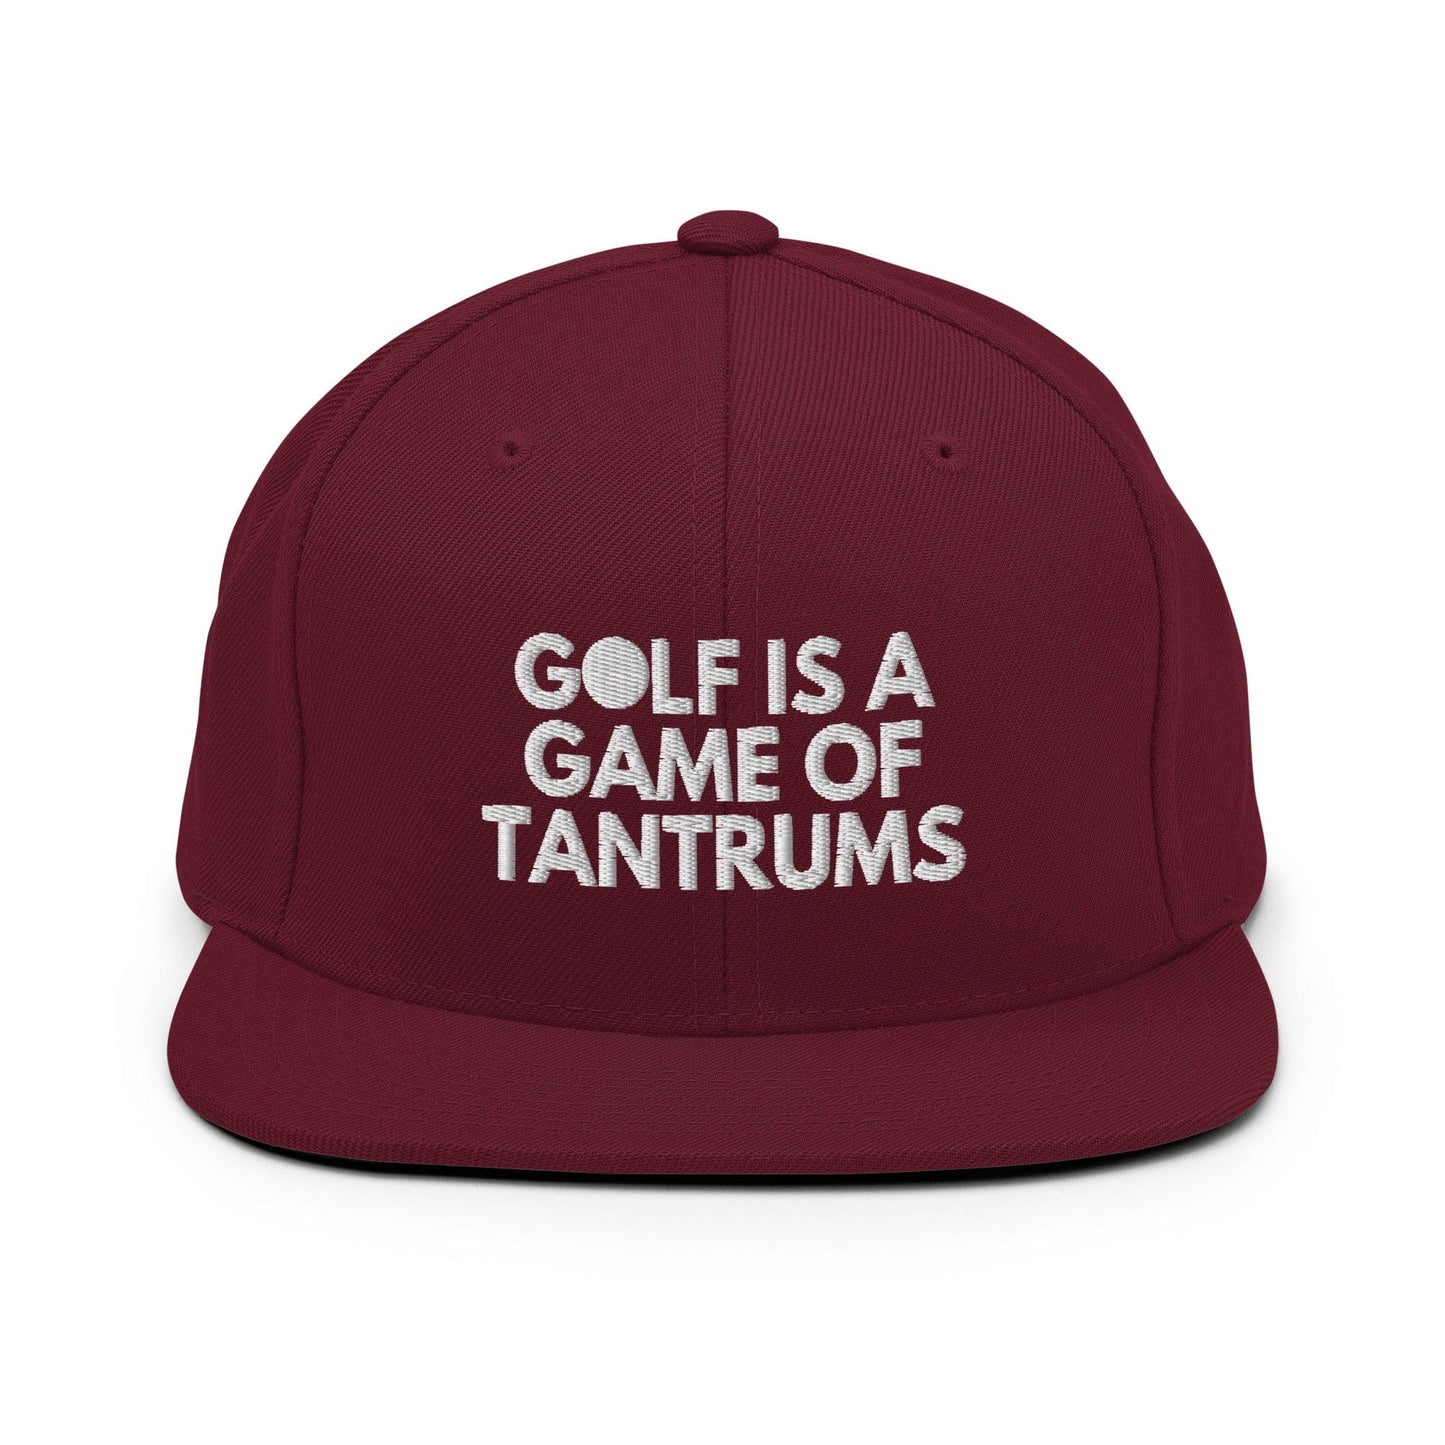 Funny Golfer Gifts  Snapback Hat Maroon Golf Is A Game Of Tantrums Hat Snapback Hat